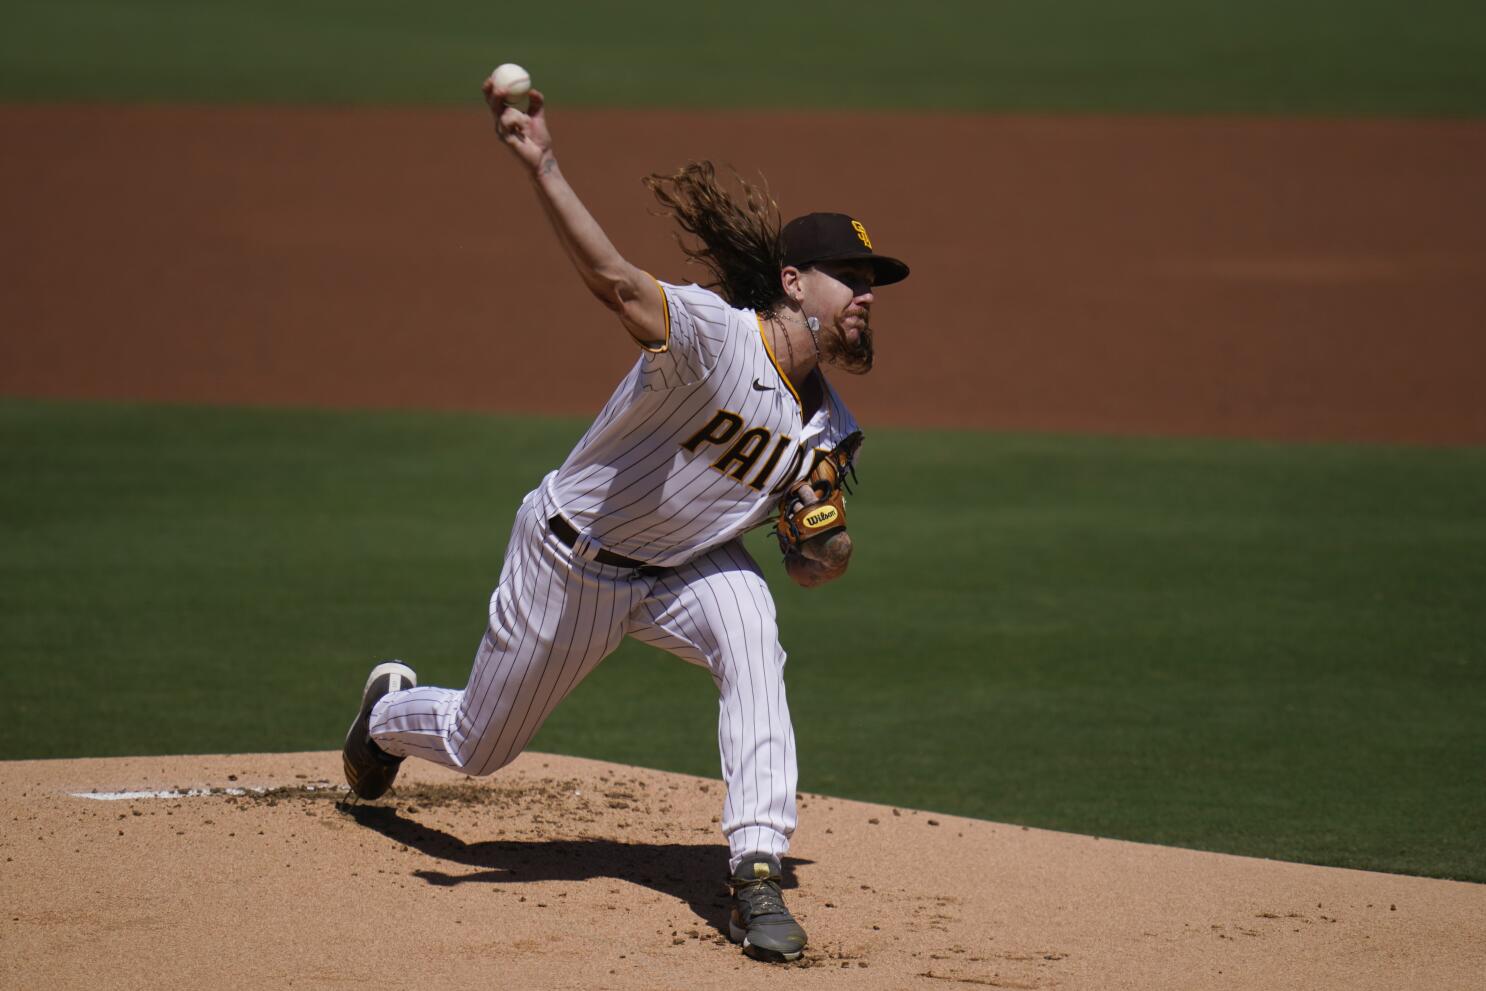 Padres pitcher Mike Clevinger to begin season on IL - Gaslamp Ball